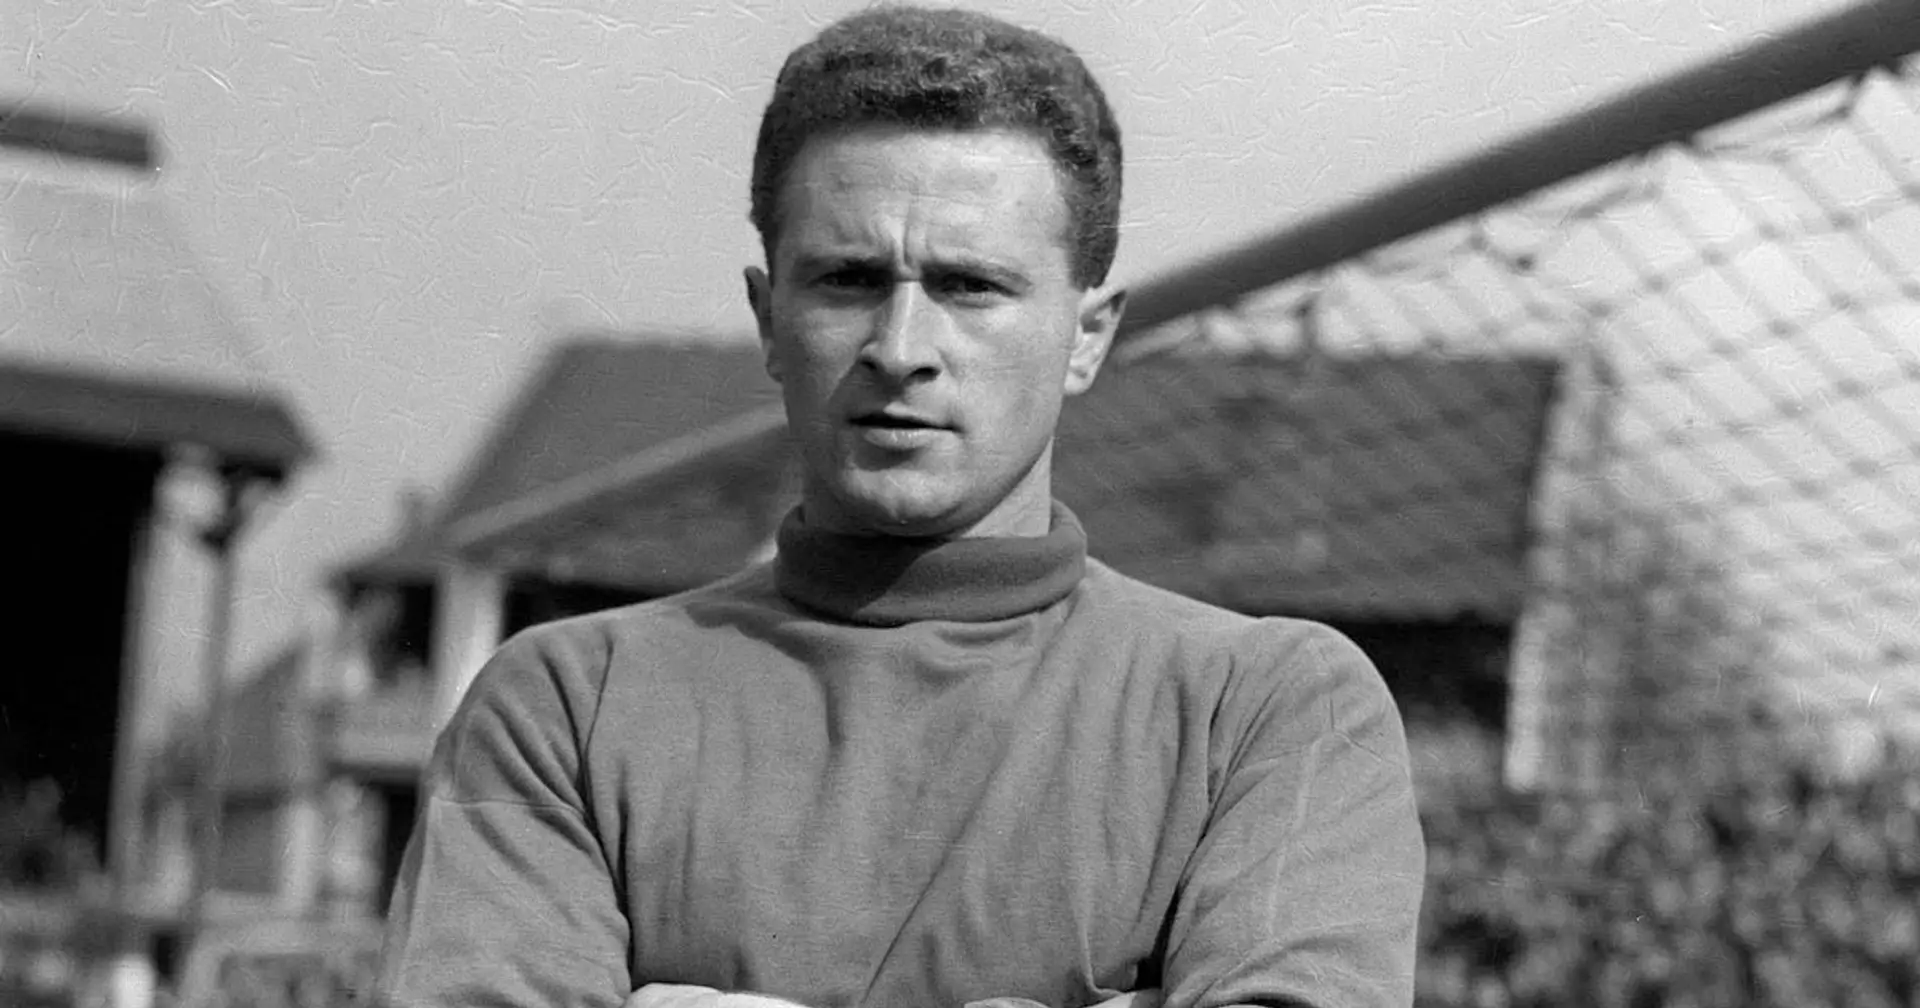 United legend Harry Gregg inducted in prestigious hall of fame & 3 more latest under-radar stories